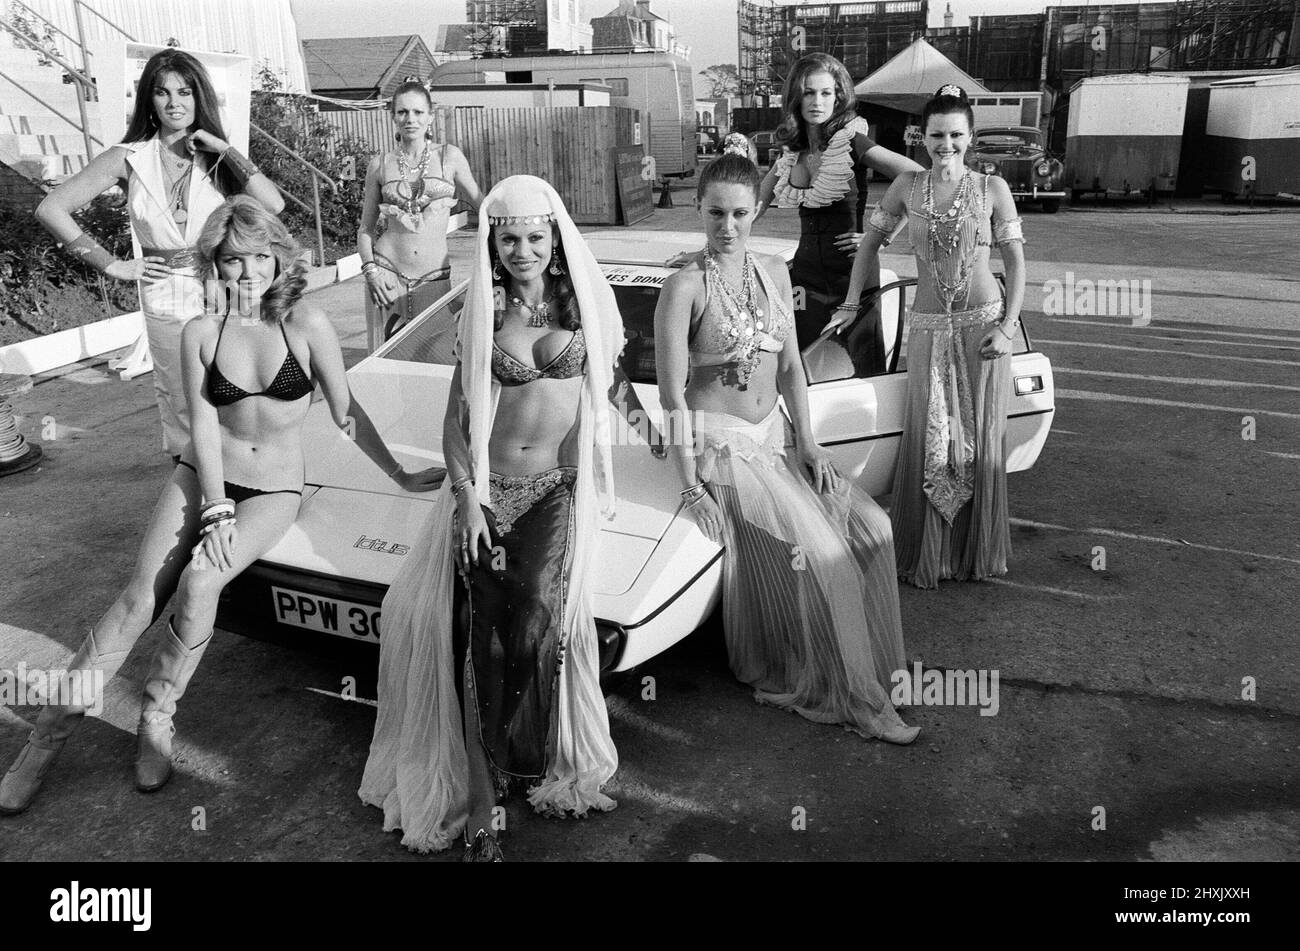 Sir Harold Wilson visited Pinewood Studios to officially open the largest film stage in the world which was created for scenes featuring a super tanker and three submarines in the latest James Bond epic ' The Spy Who Loved Me'. Pictured are Bond girls (left to right) Caroline Munroe, Sue Vanner, Jill Goodall, Dawn Rodriques, Felicity York, Valerie Leon and Anika Pavel. 5th December 1976. Stock Photo